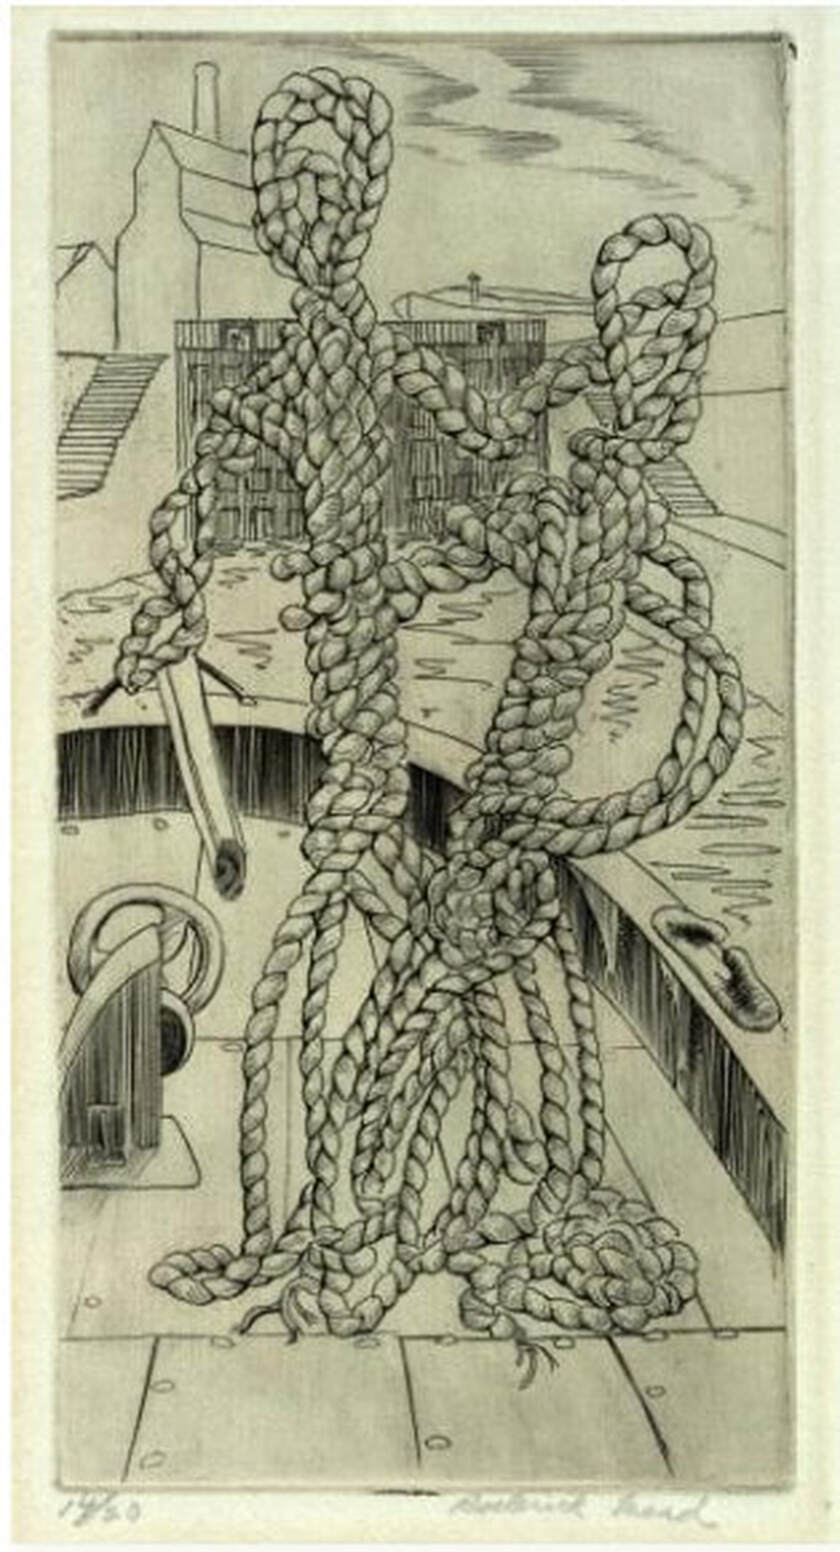 Picture of Roderick Mead's print, Rope People